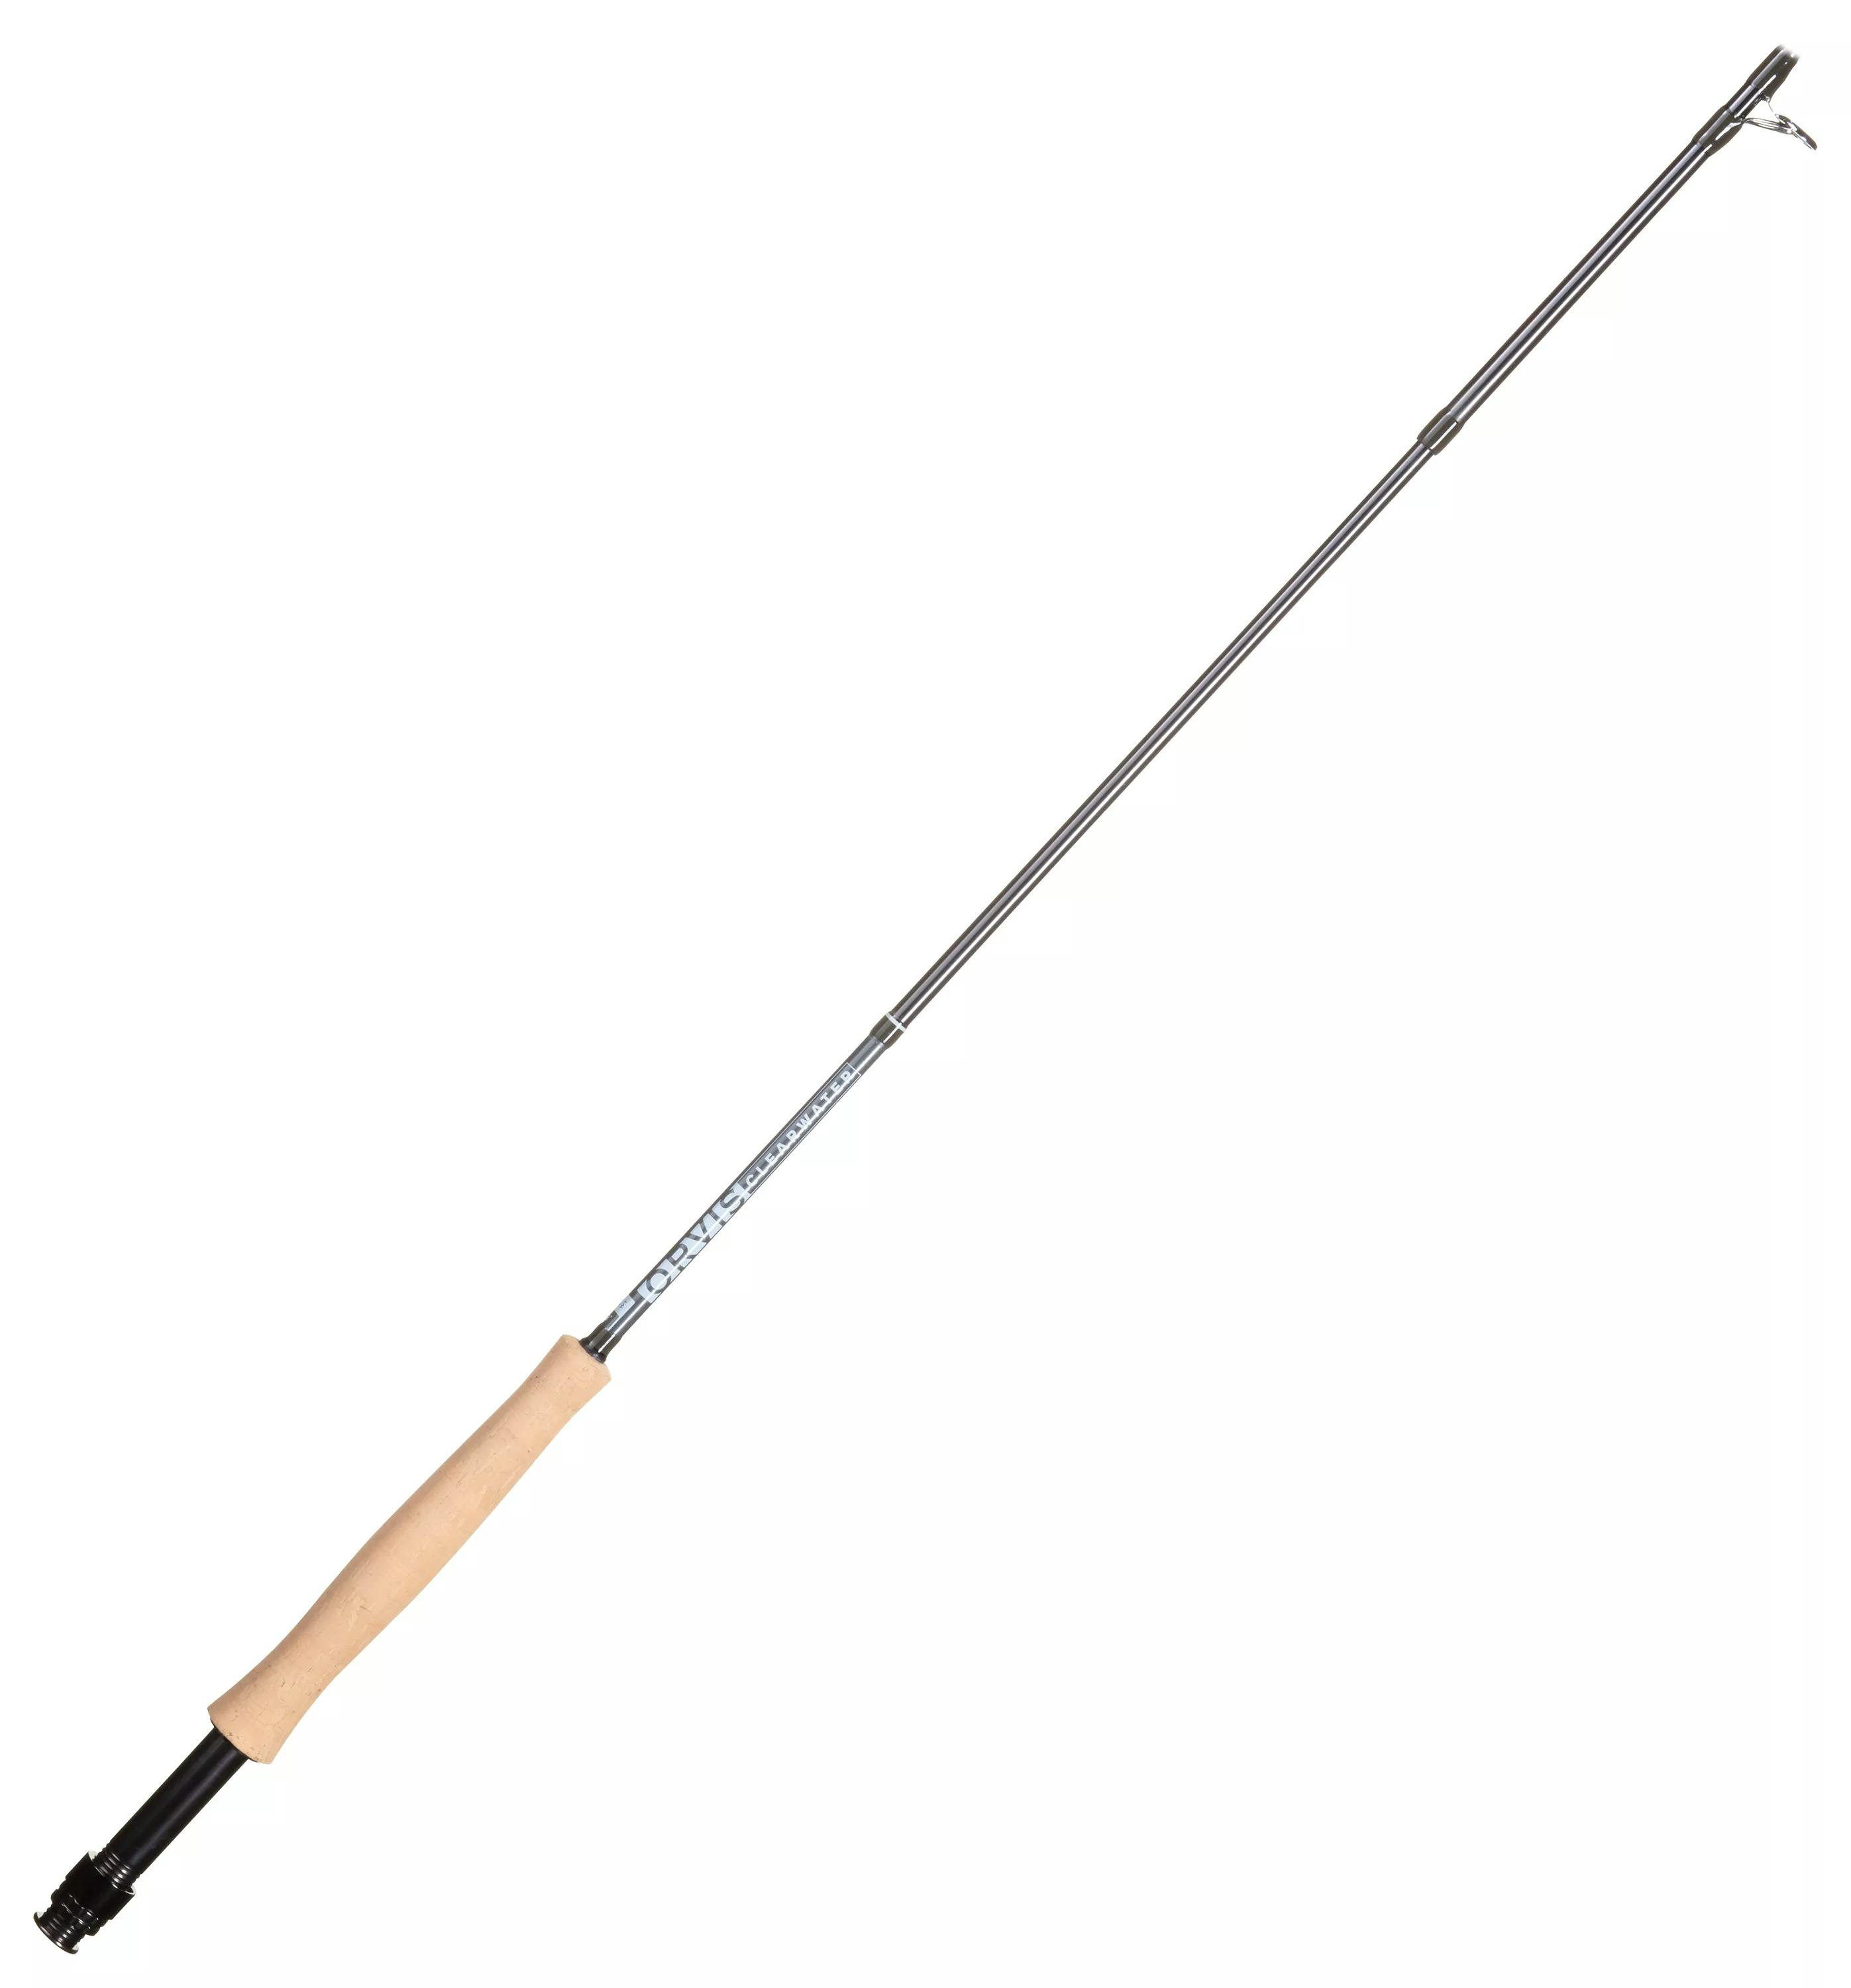 Fly Rod Review: Orvis Recon Series